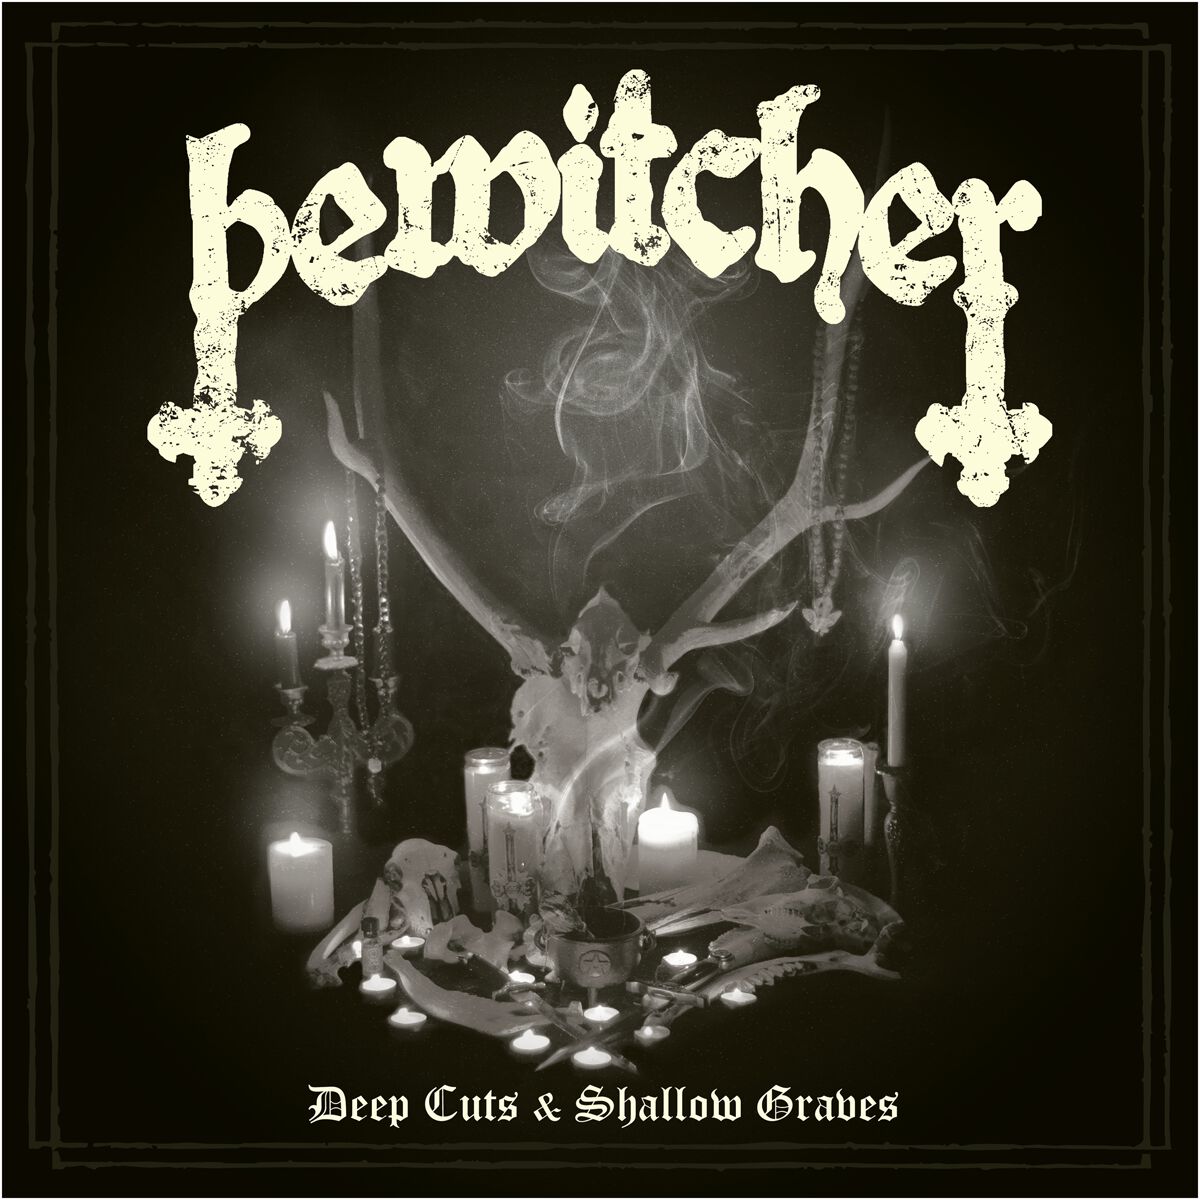 Bewitcher Deep cuts & shallow graves LP multicolor